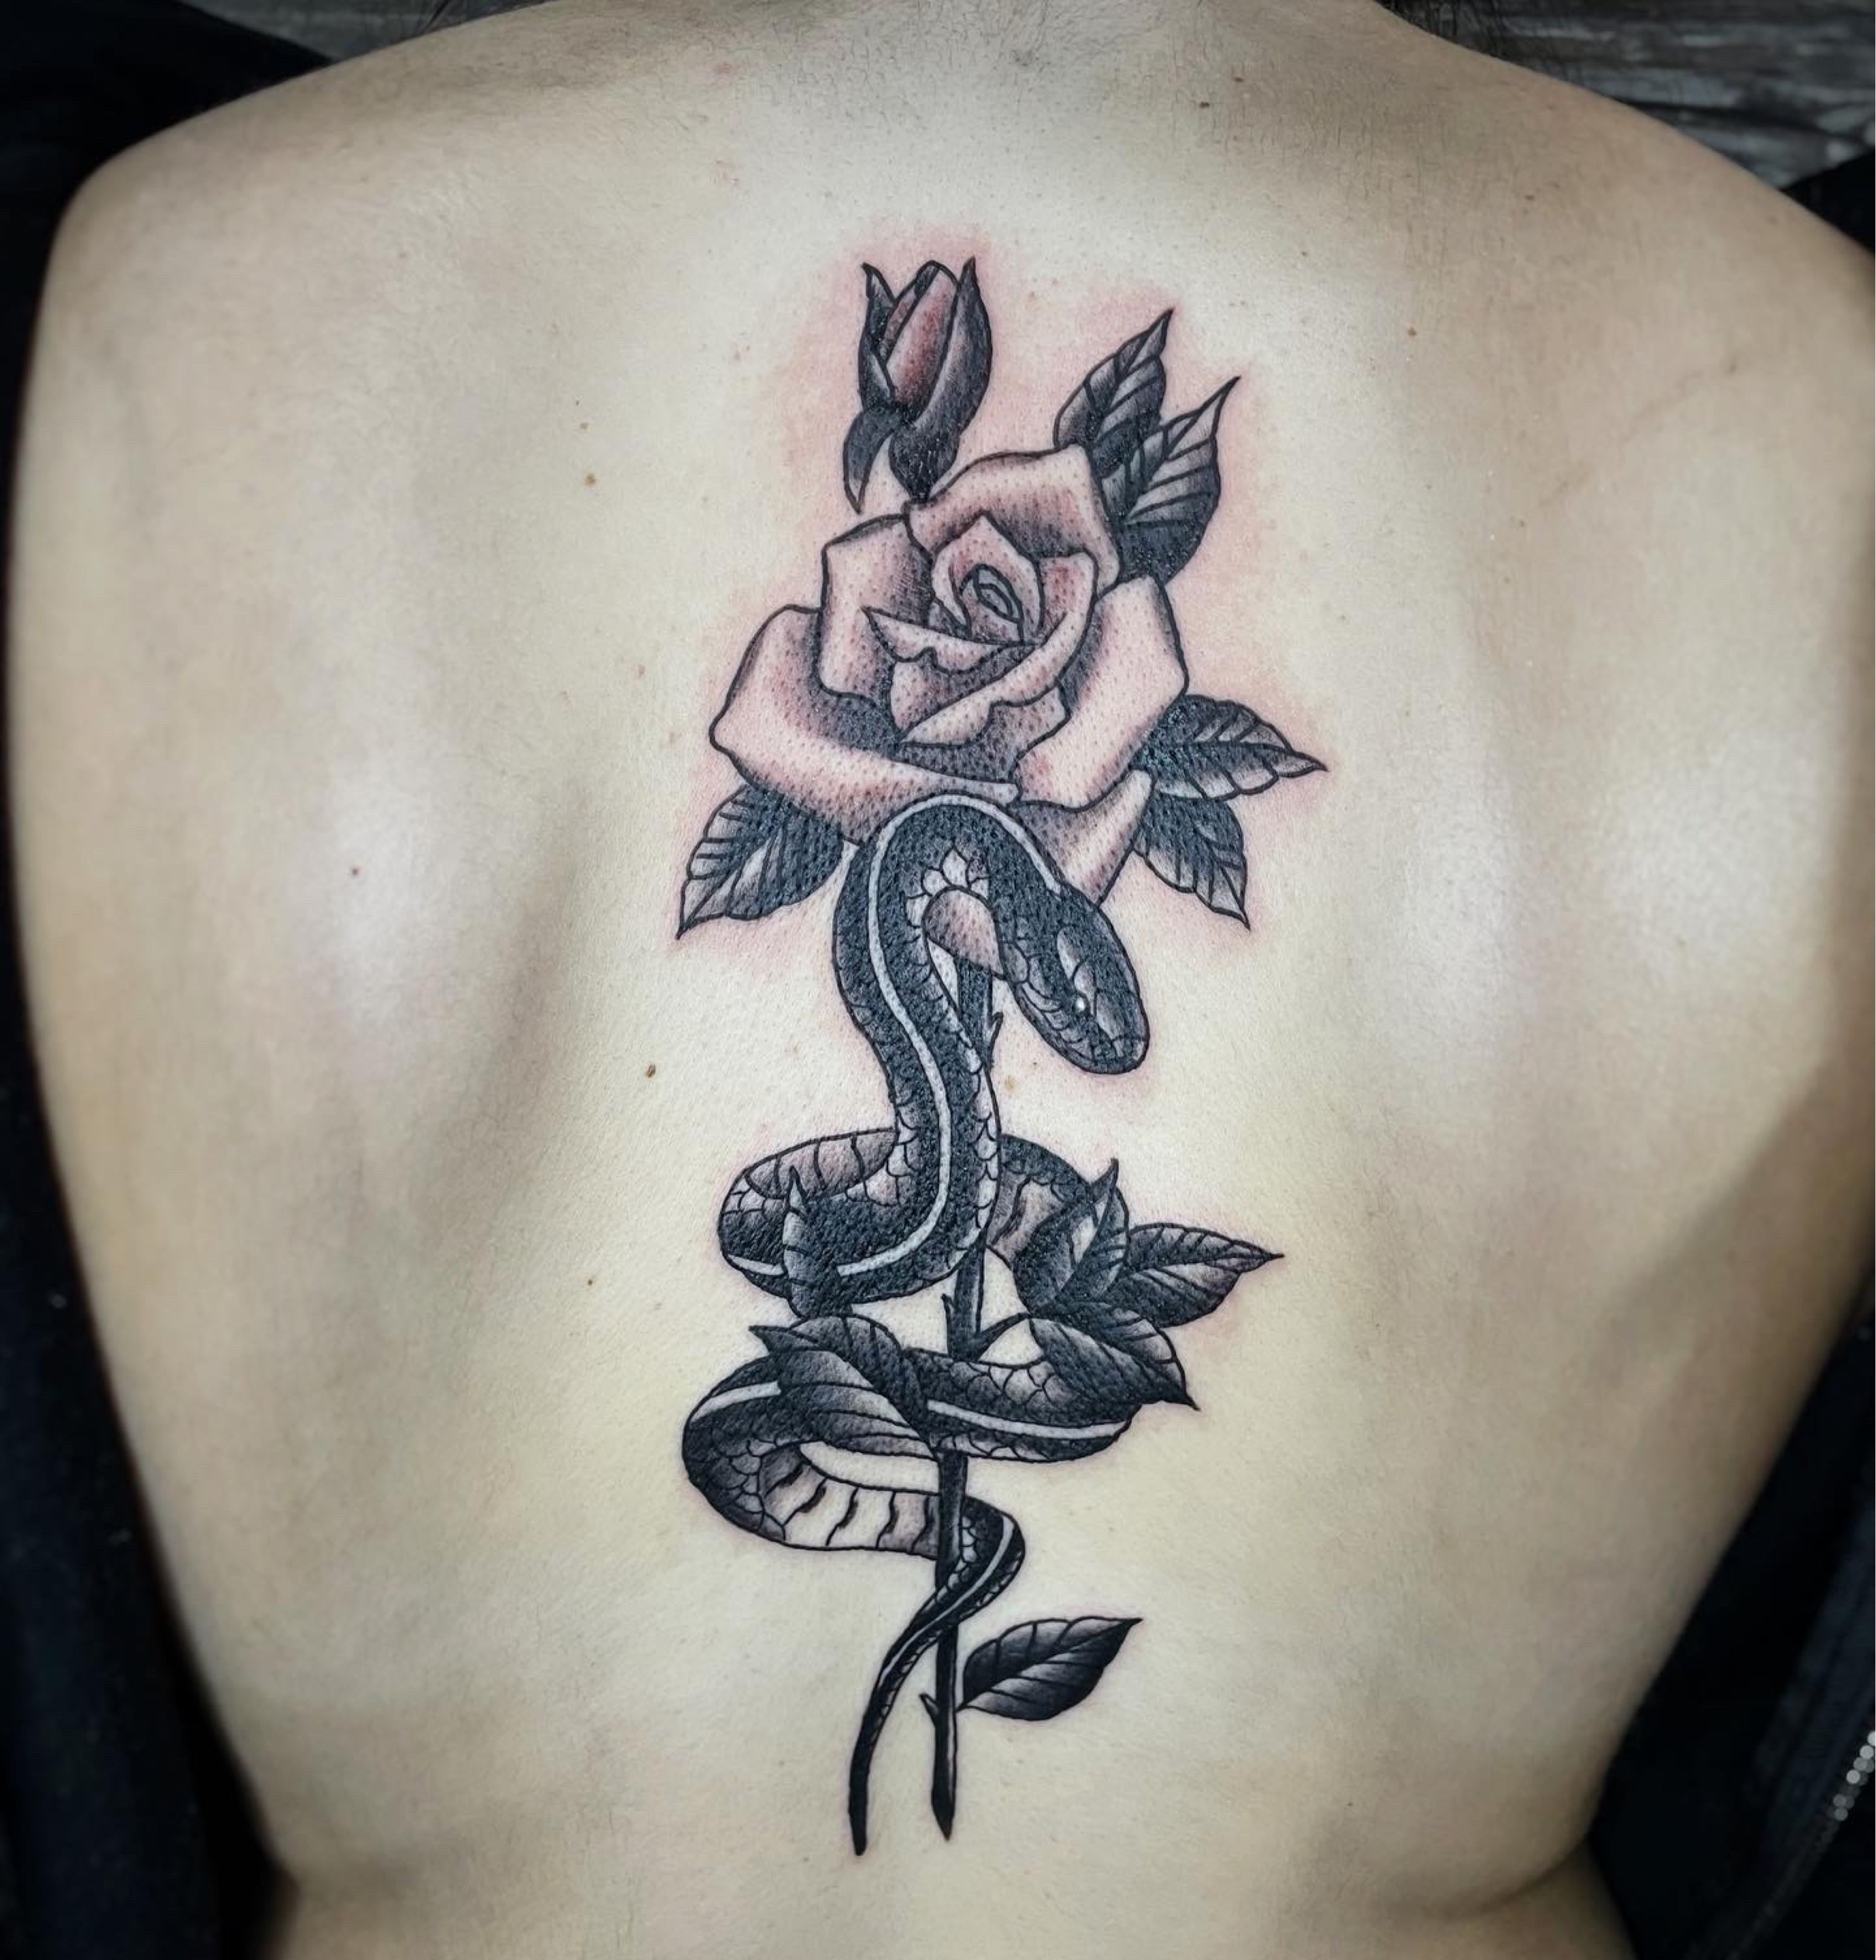 Full Custom Tattoo - Delicate roses up spine by TommyG | Facebook